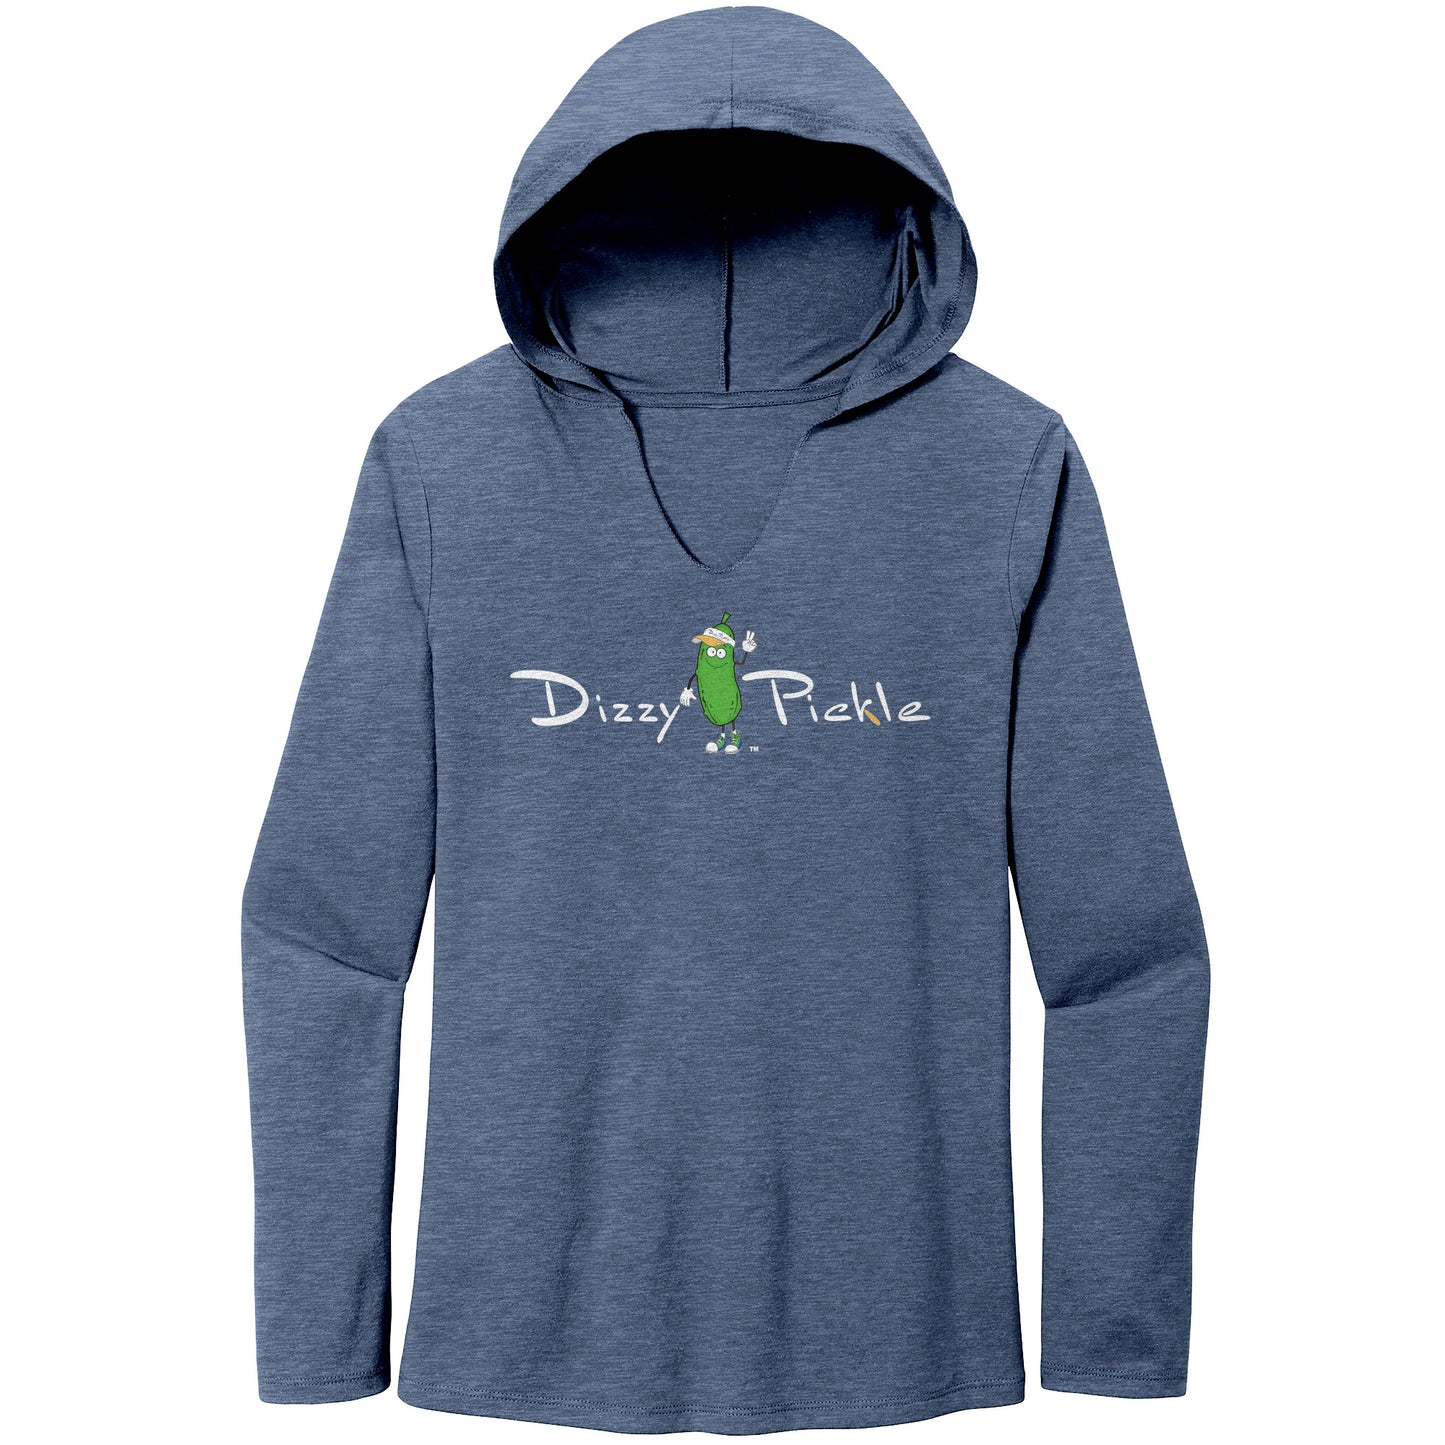 DZY P Classic - Women's Light Weight Long Sleeve Hoodie by Dizzy Pickle